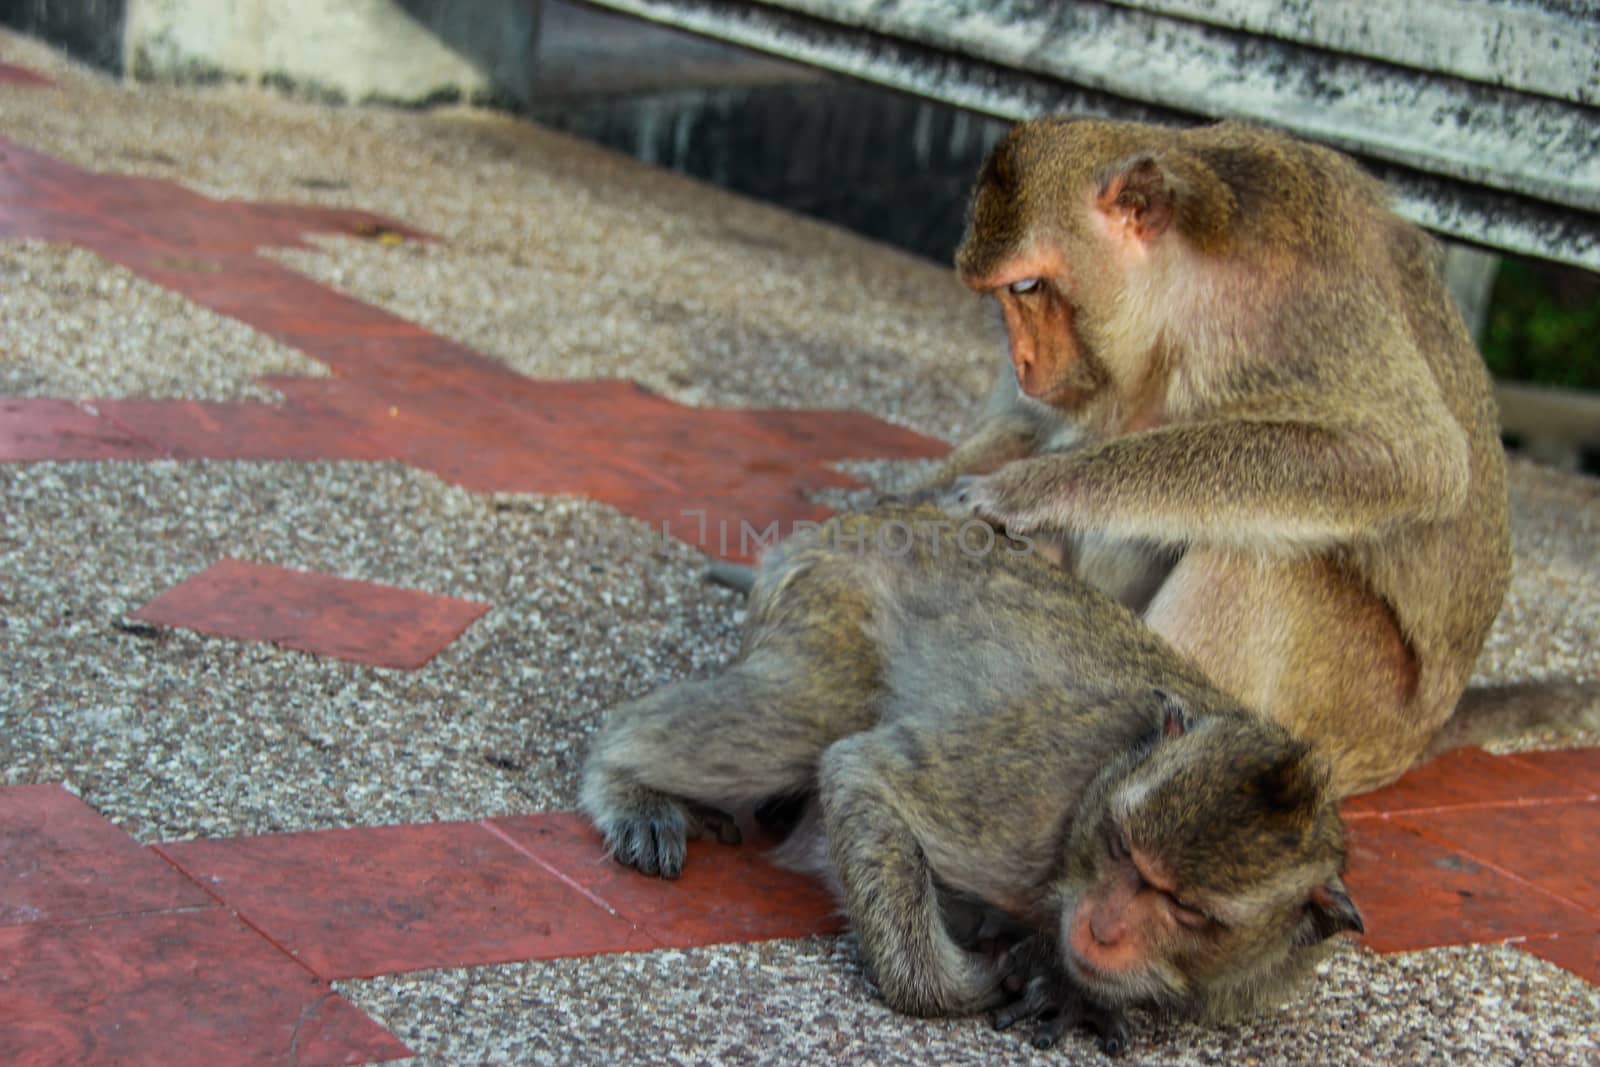 Monkeys are looking for ticks for each other.